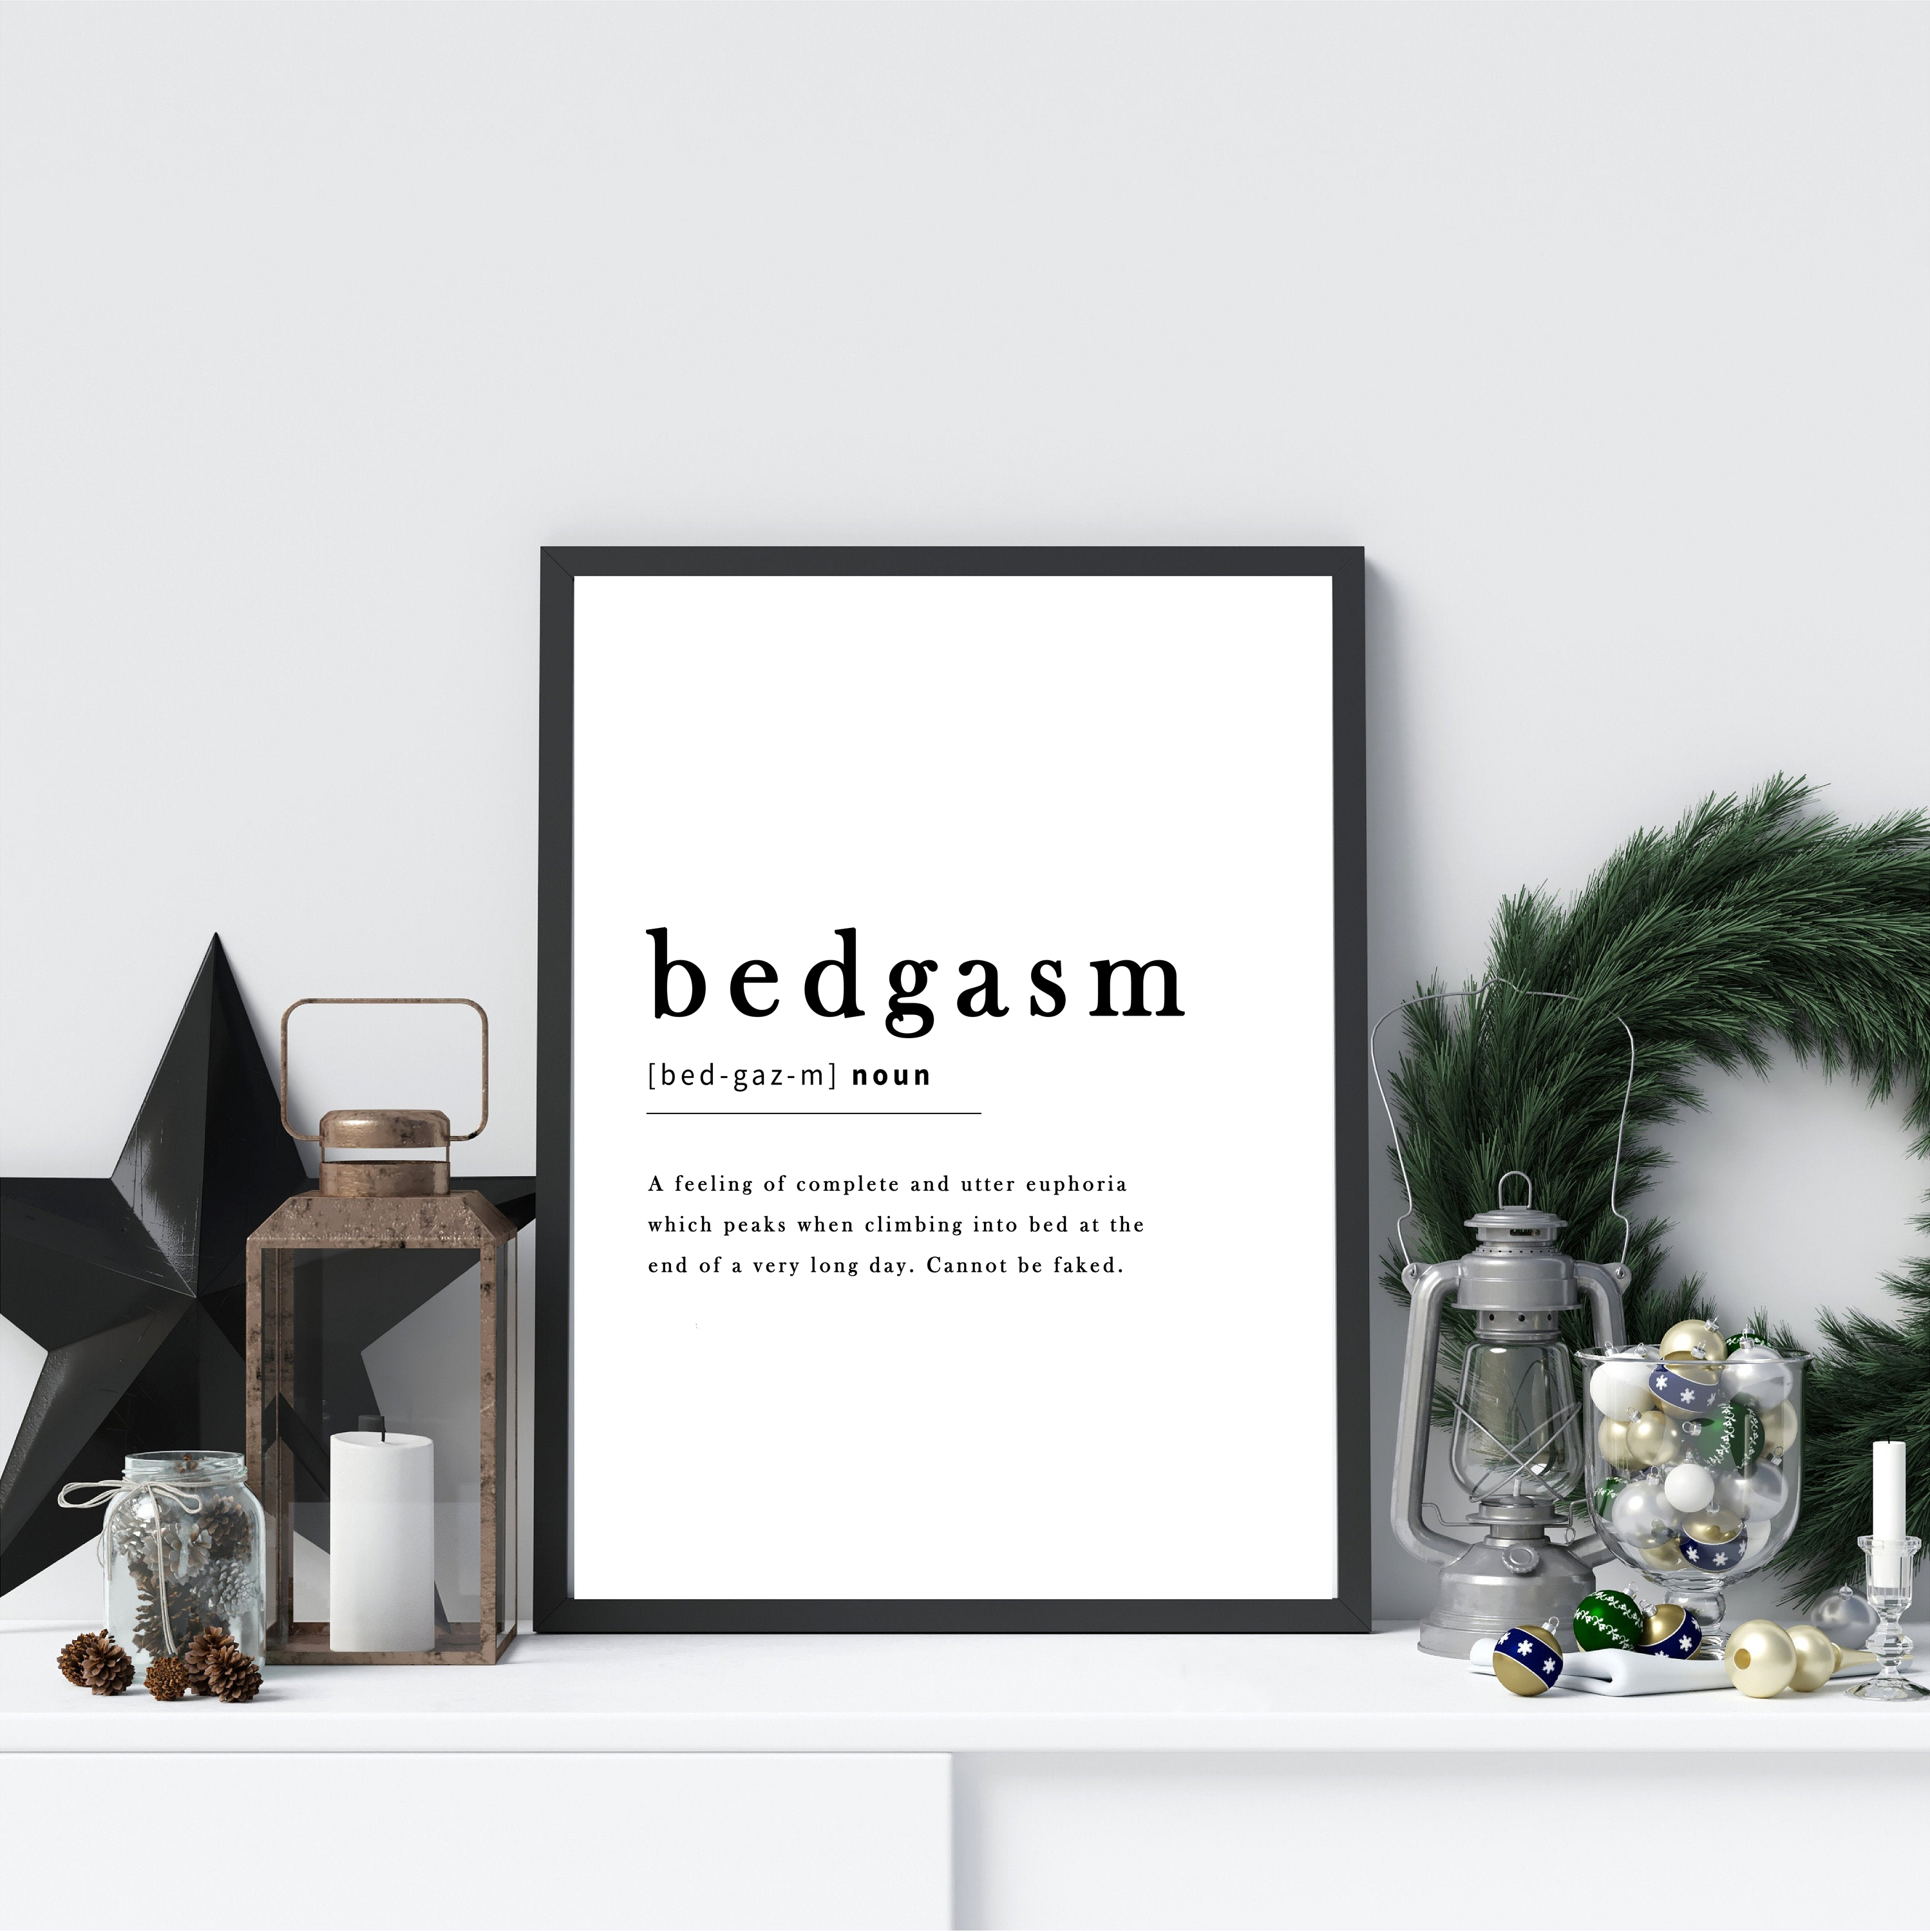 Bedgasm Noun Definition Wall Print Bedroom Picture Quote